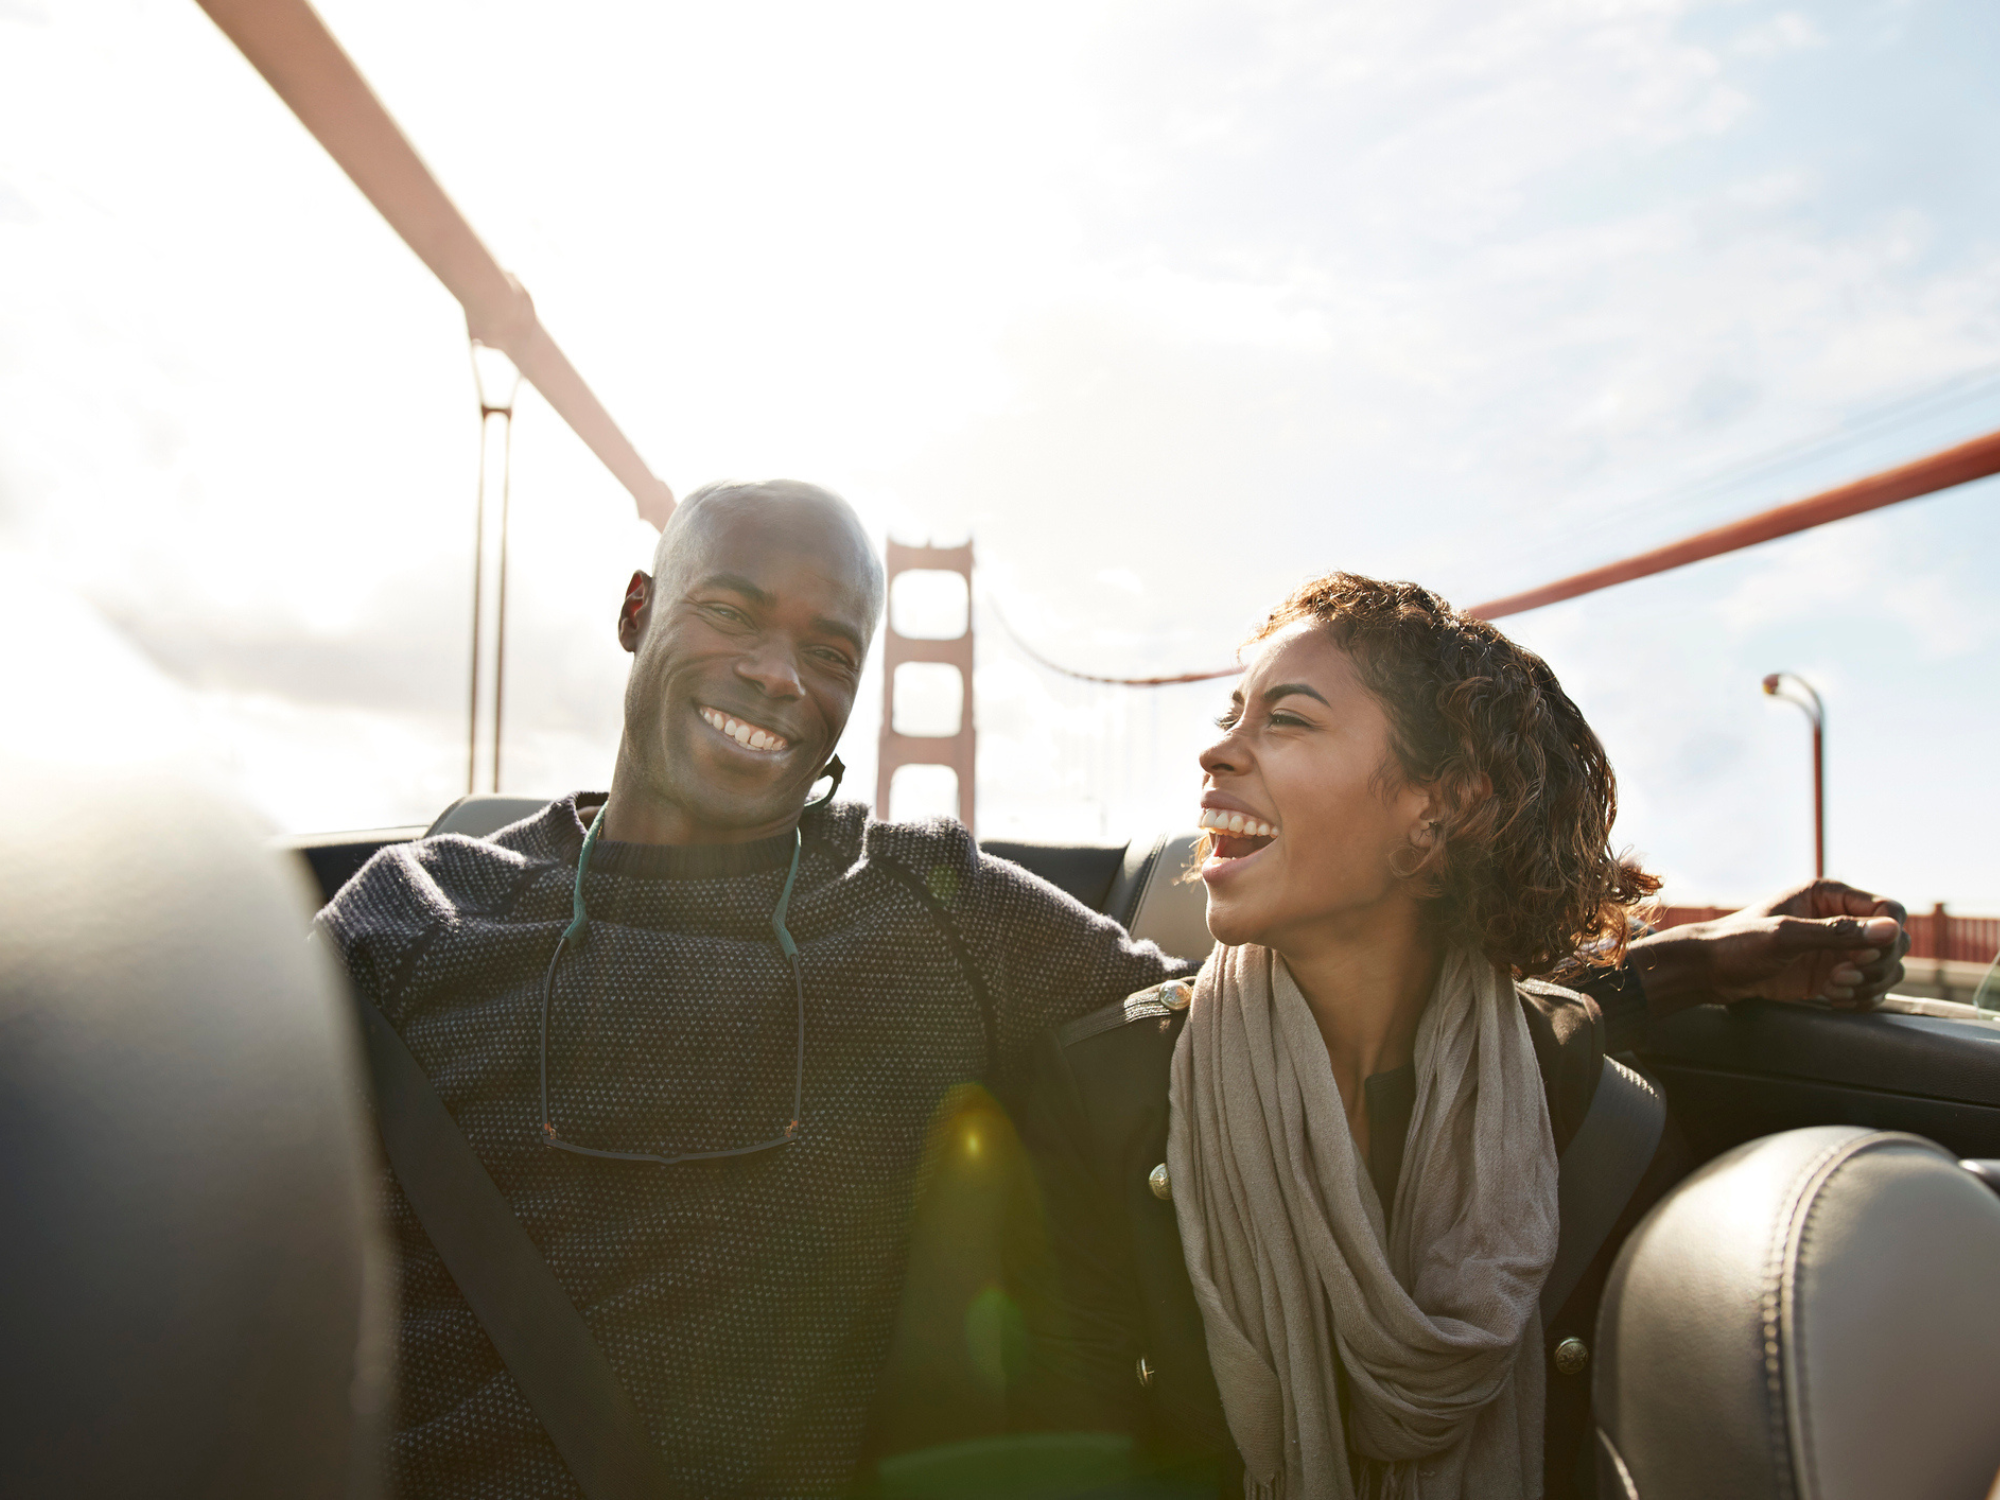 Couple smiling at each other while riding in car on Golden Gate Bridge in San Francisco, California